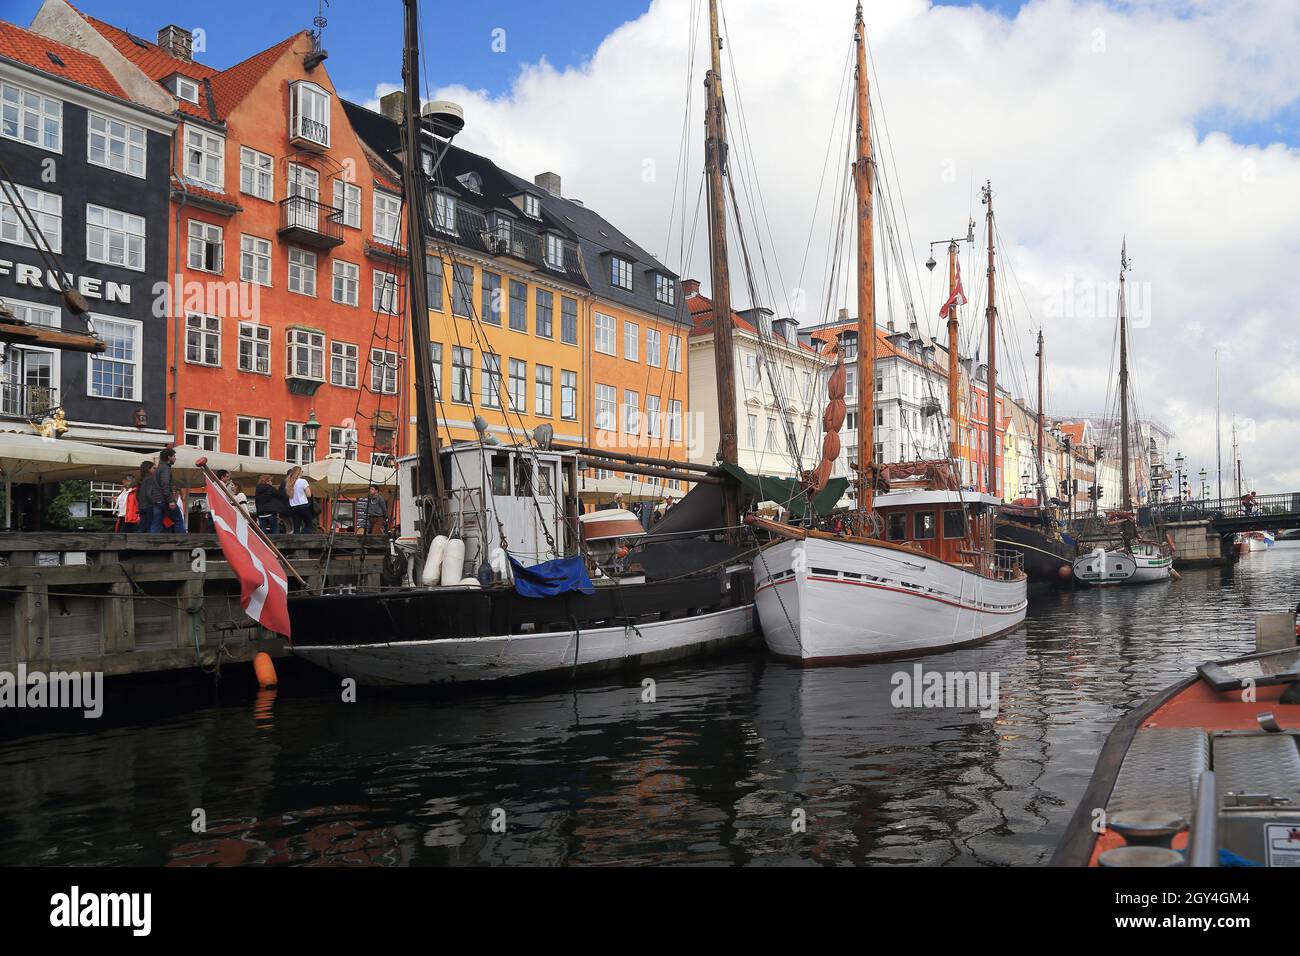 COPENHAGEN, DENMARK - JUNE 29, 2016: Old ships are located along the harbor of Nyhavn, to complement the colorfulness of this showplace. Stock Photo